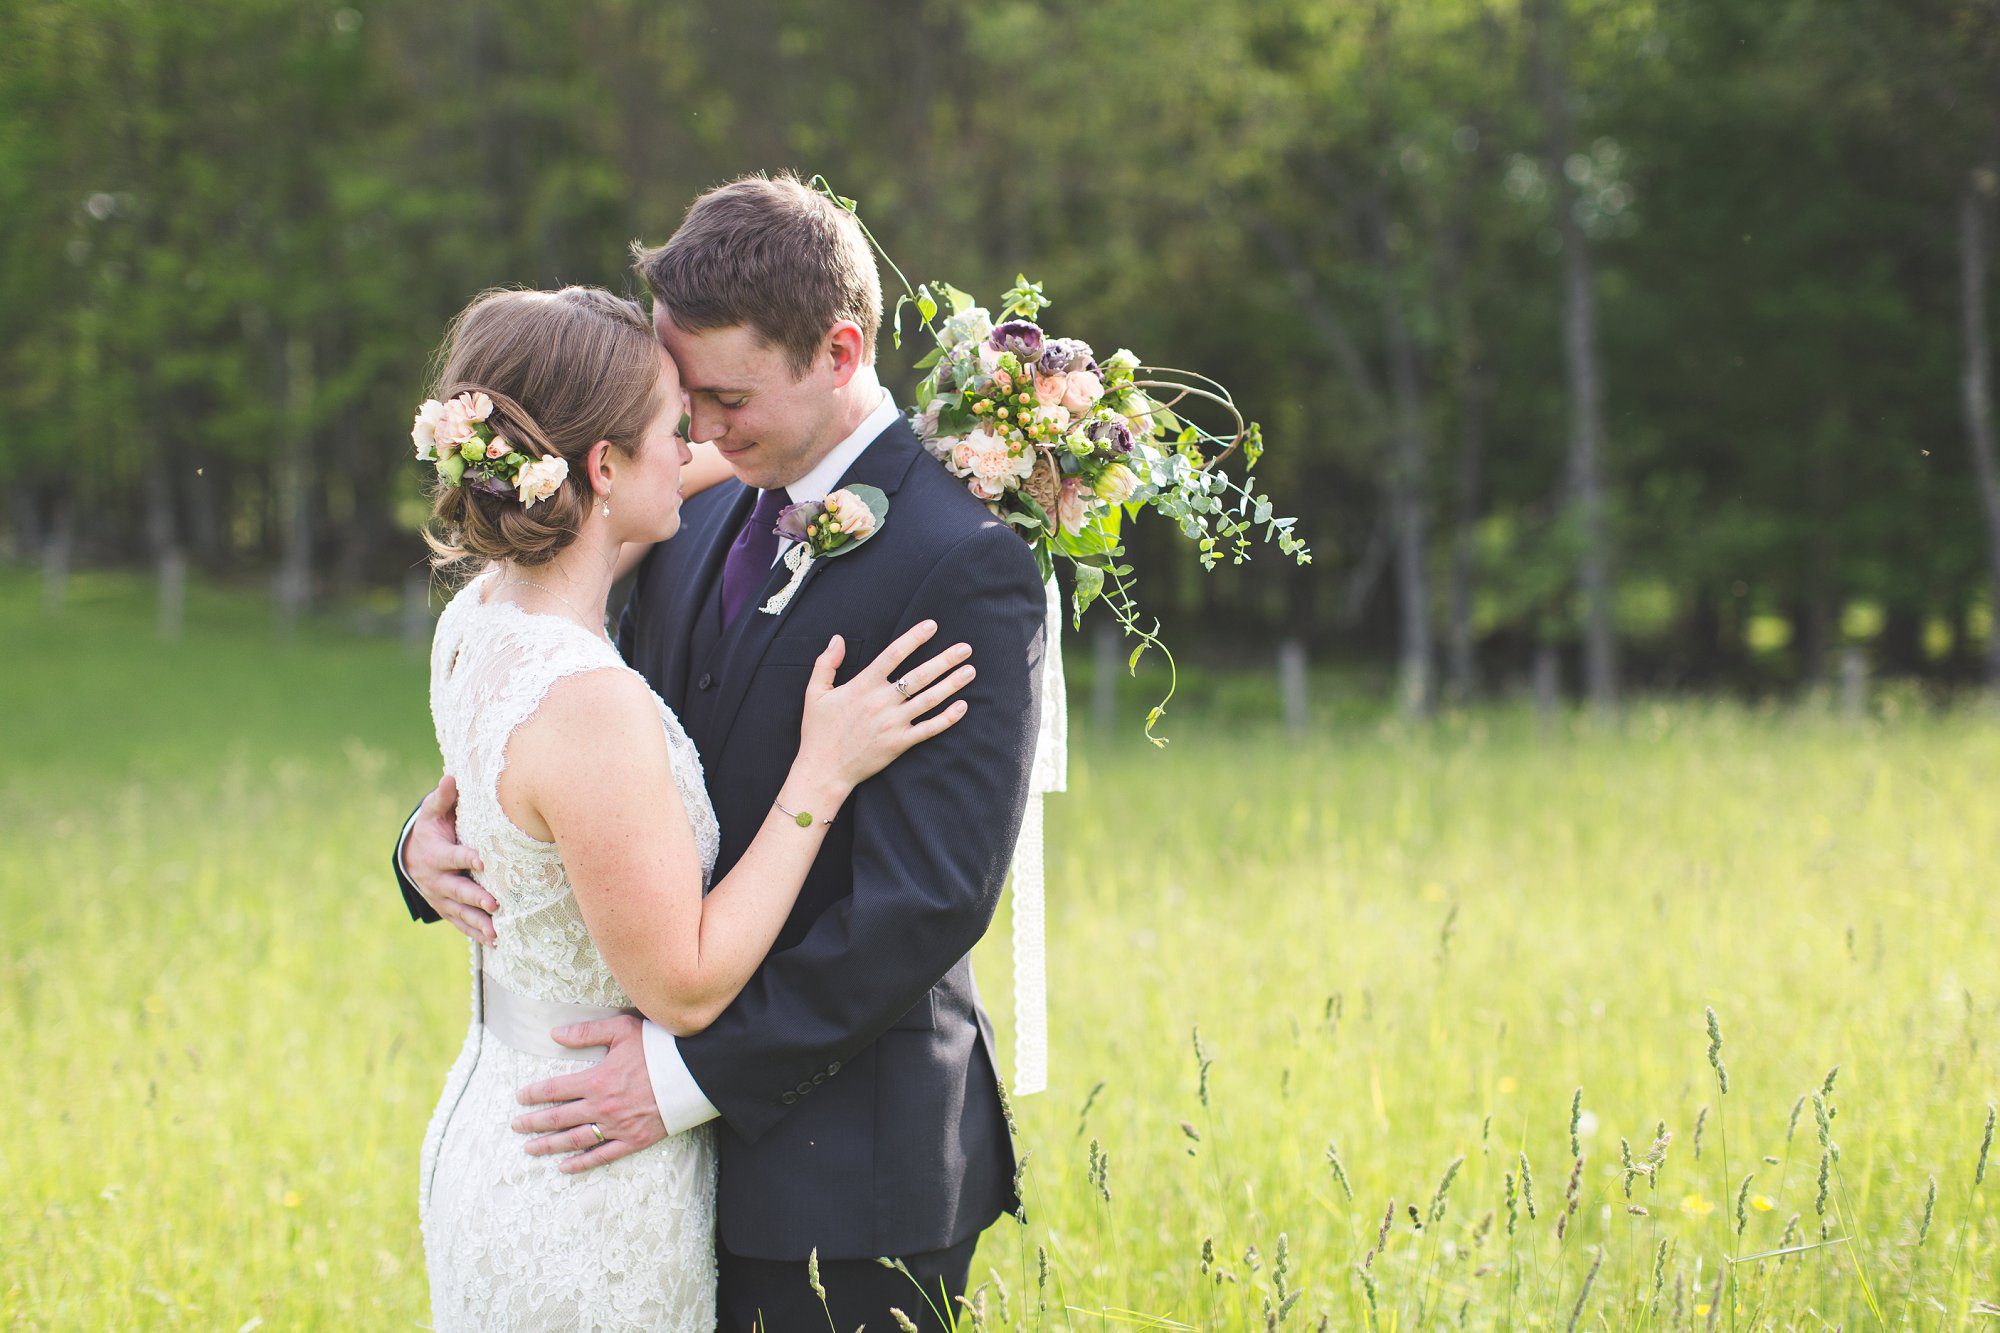 Wedding Photos in a grassy field in the White Mountains of NH